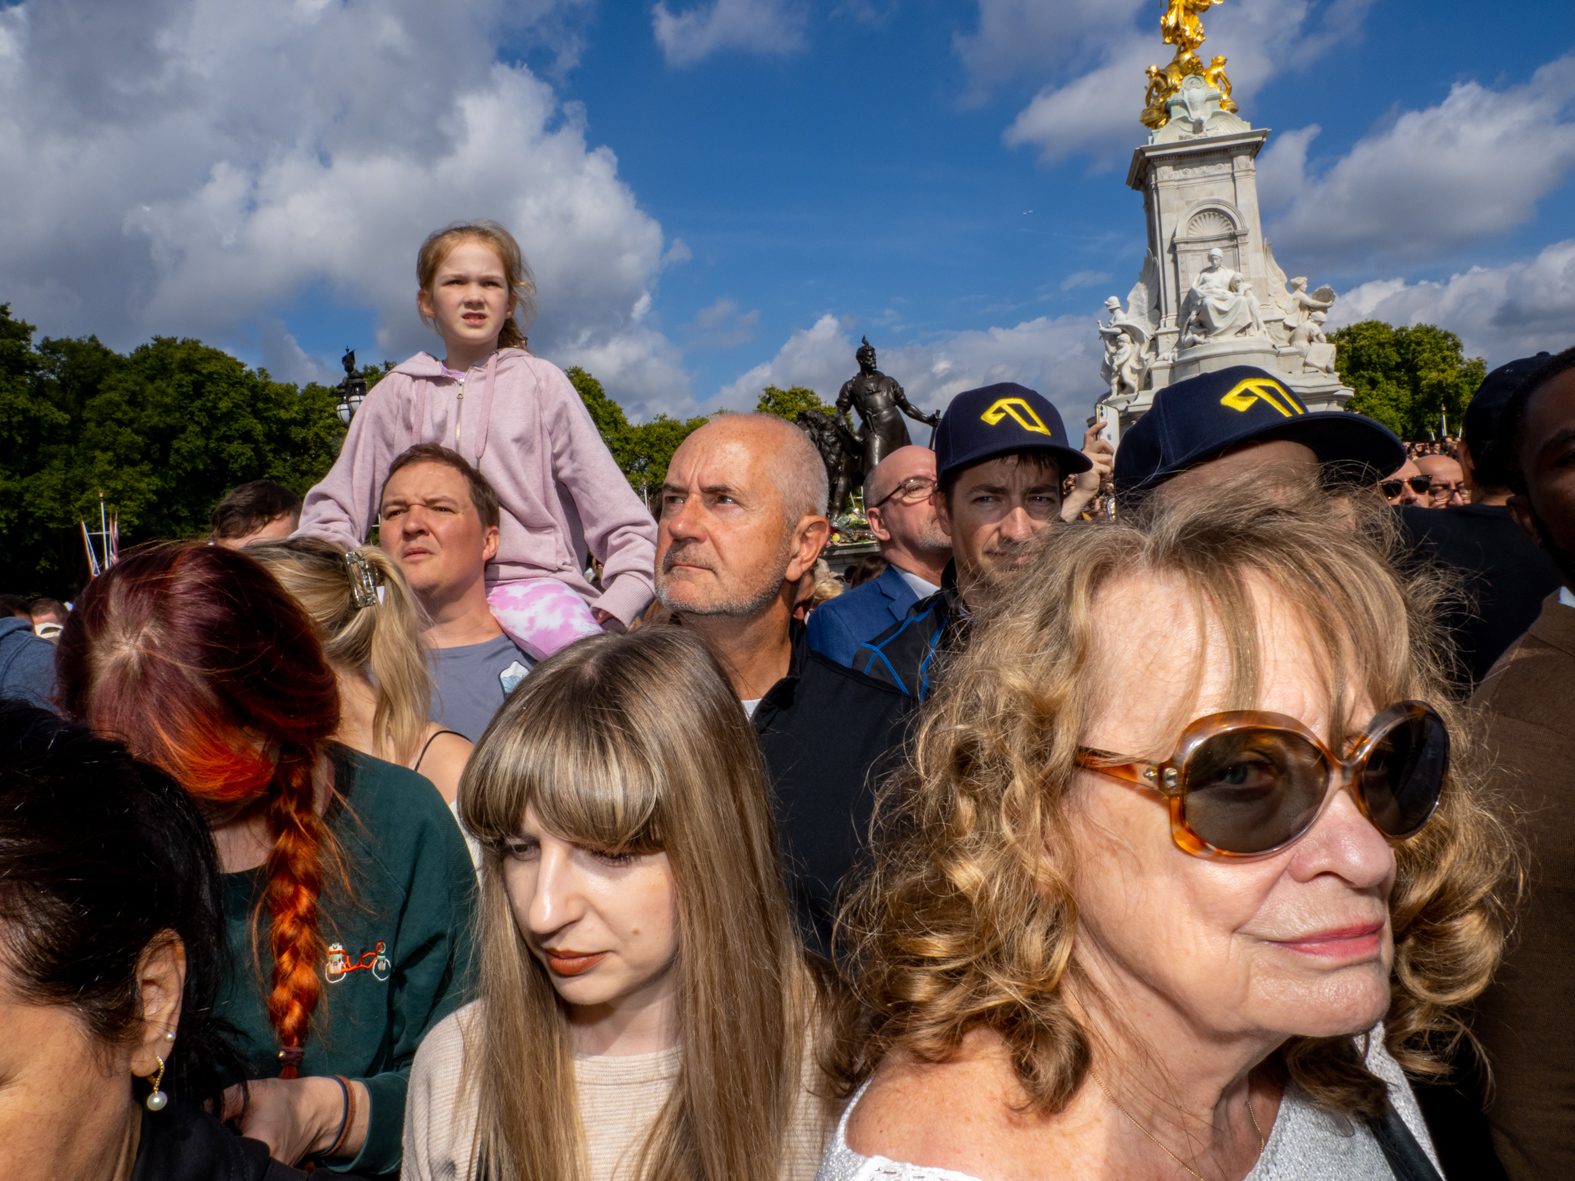 Visitors arrive at Buckingham Palace on the 9th September in London, United Kingdom following the death of Queen Elizabeth II at the age of 96. They came in their thousands to pay their respects, lay floral tributes and hope for a glimpse of King Charles III. (photo by Peter Dench/Getty Images)